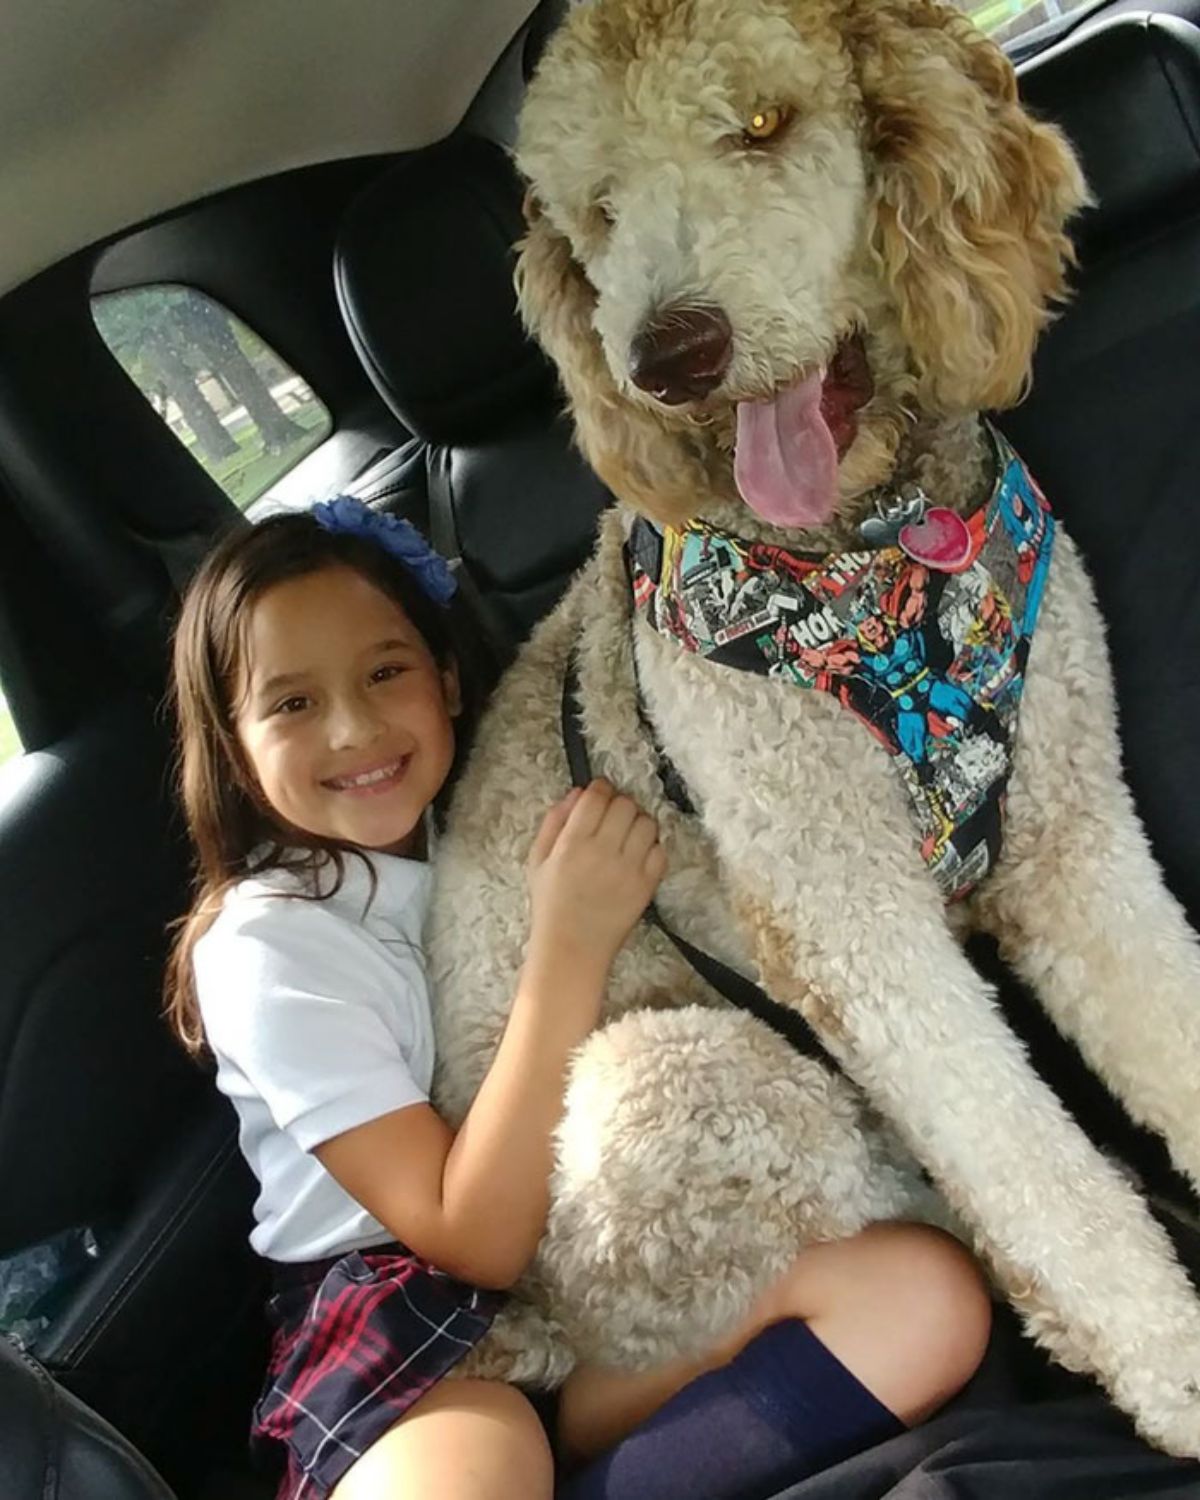 white and brown poodle sitting in the backseat of a vehicle with a little girl holding the dog